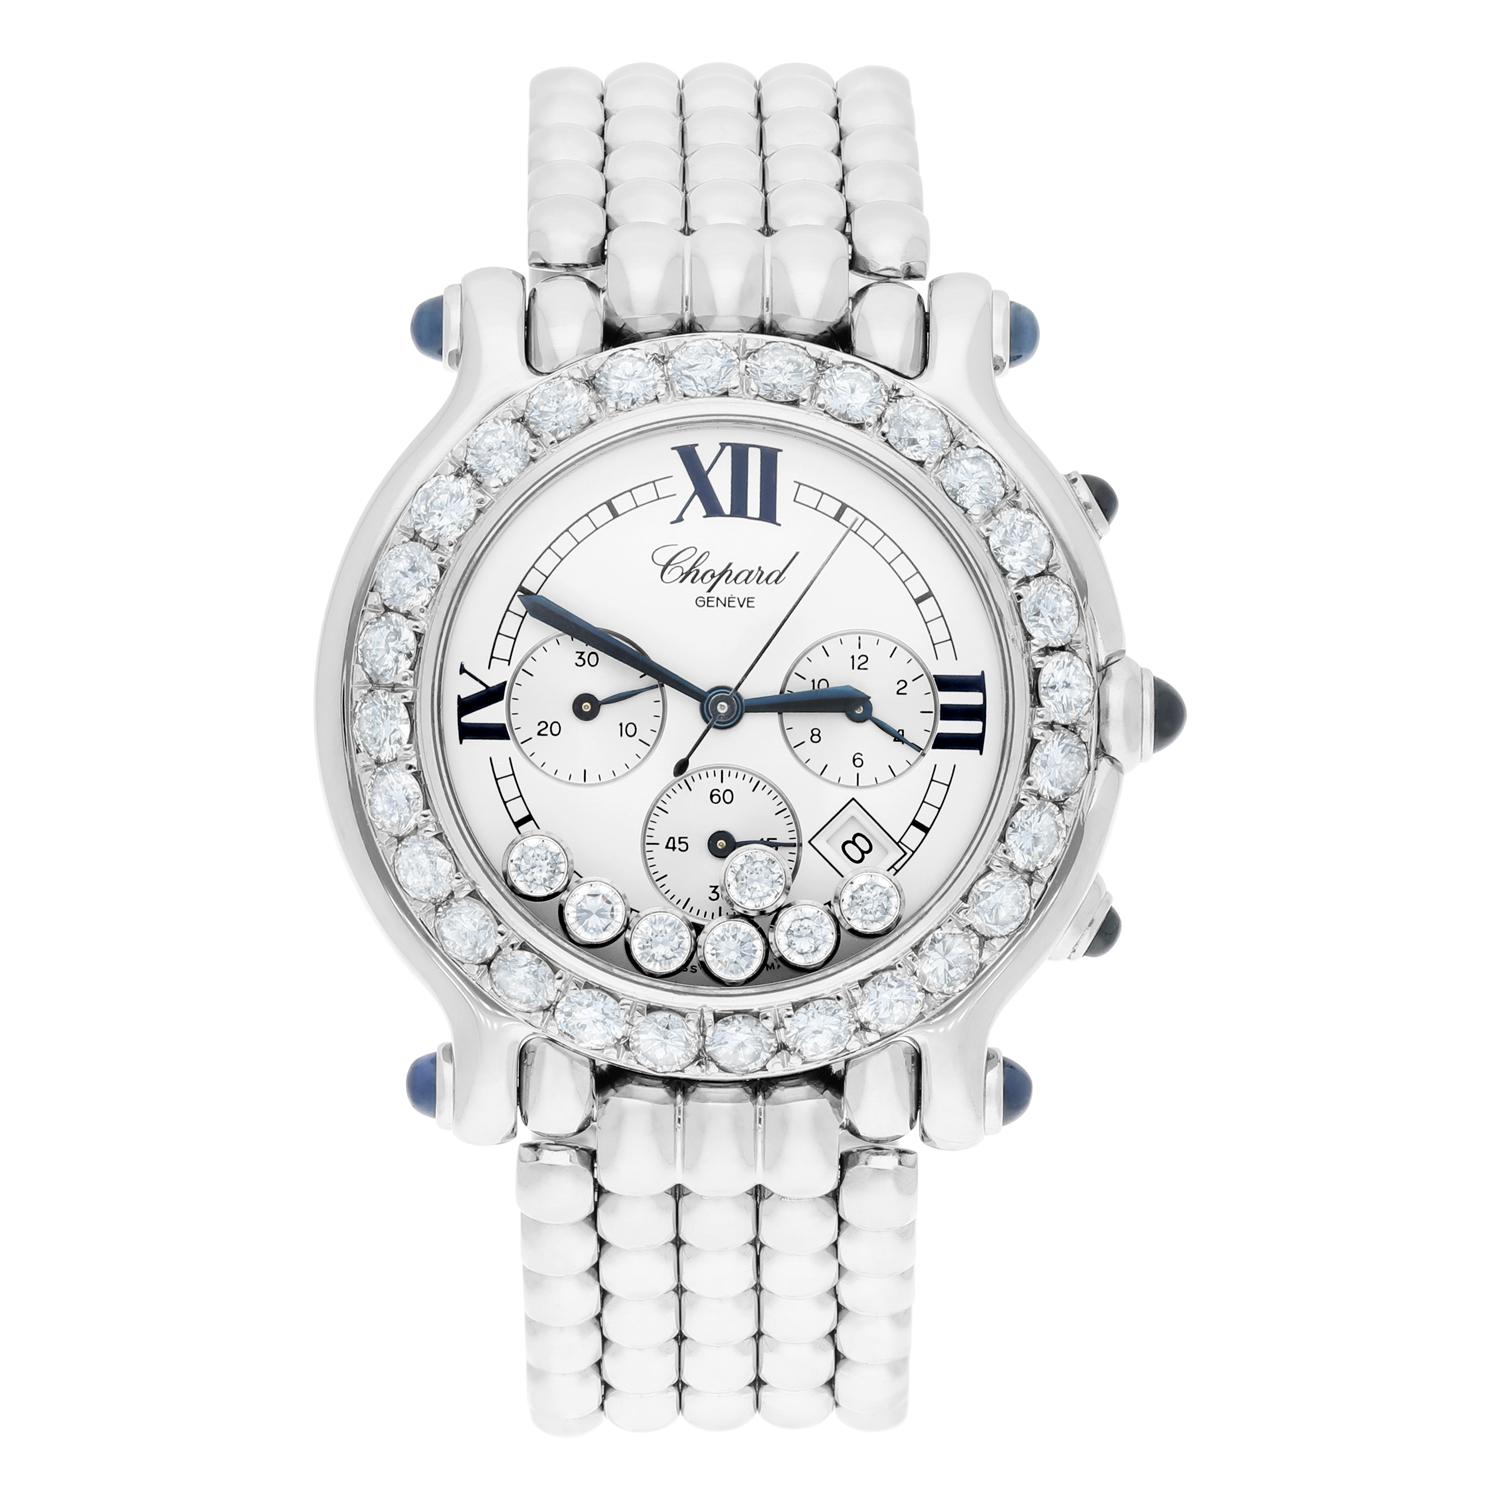 This Chopard Happy Sport chronograph wristwatch is the perfect luxury accessory for women. It features a stunning round white dial with Roman numerals, 7 factory floating diamond inside and custom set diamond bezel with 100% natural diamonds. The